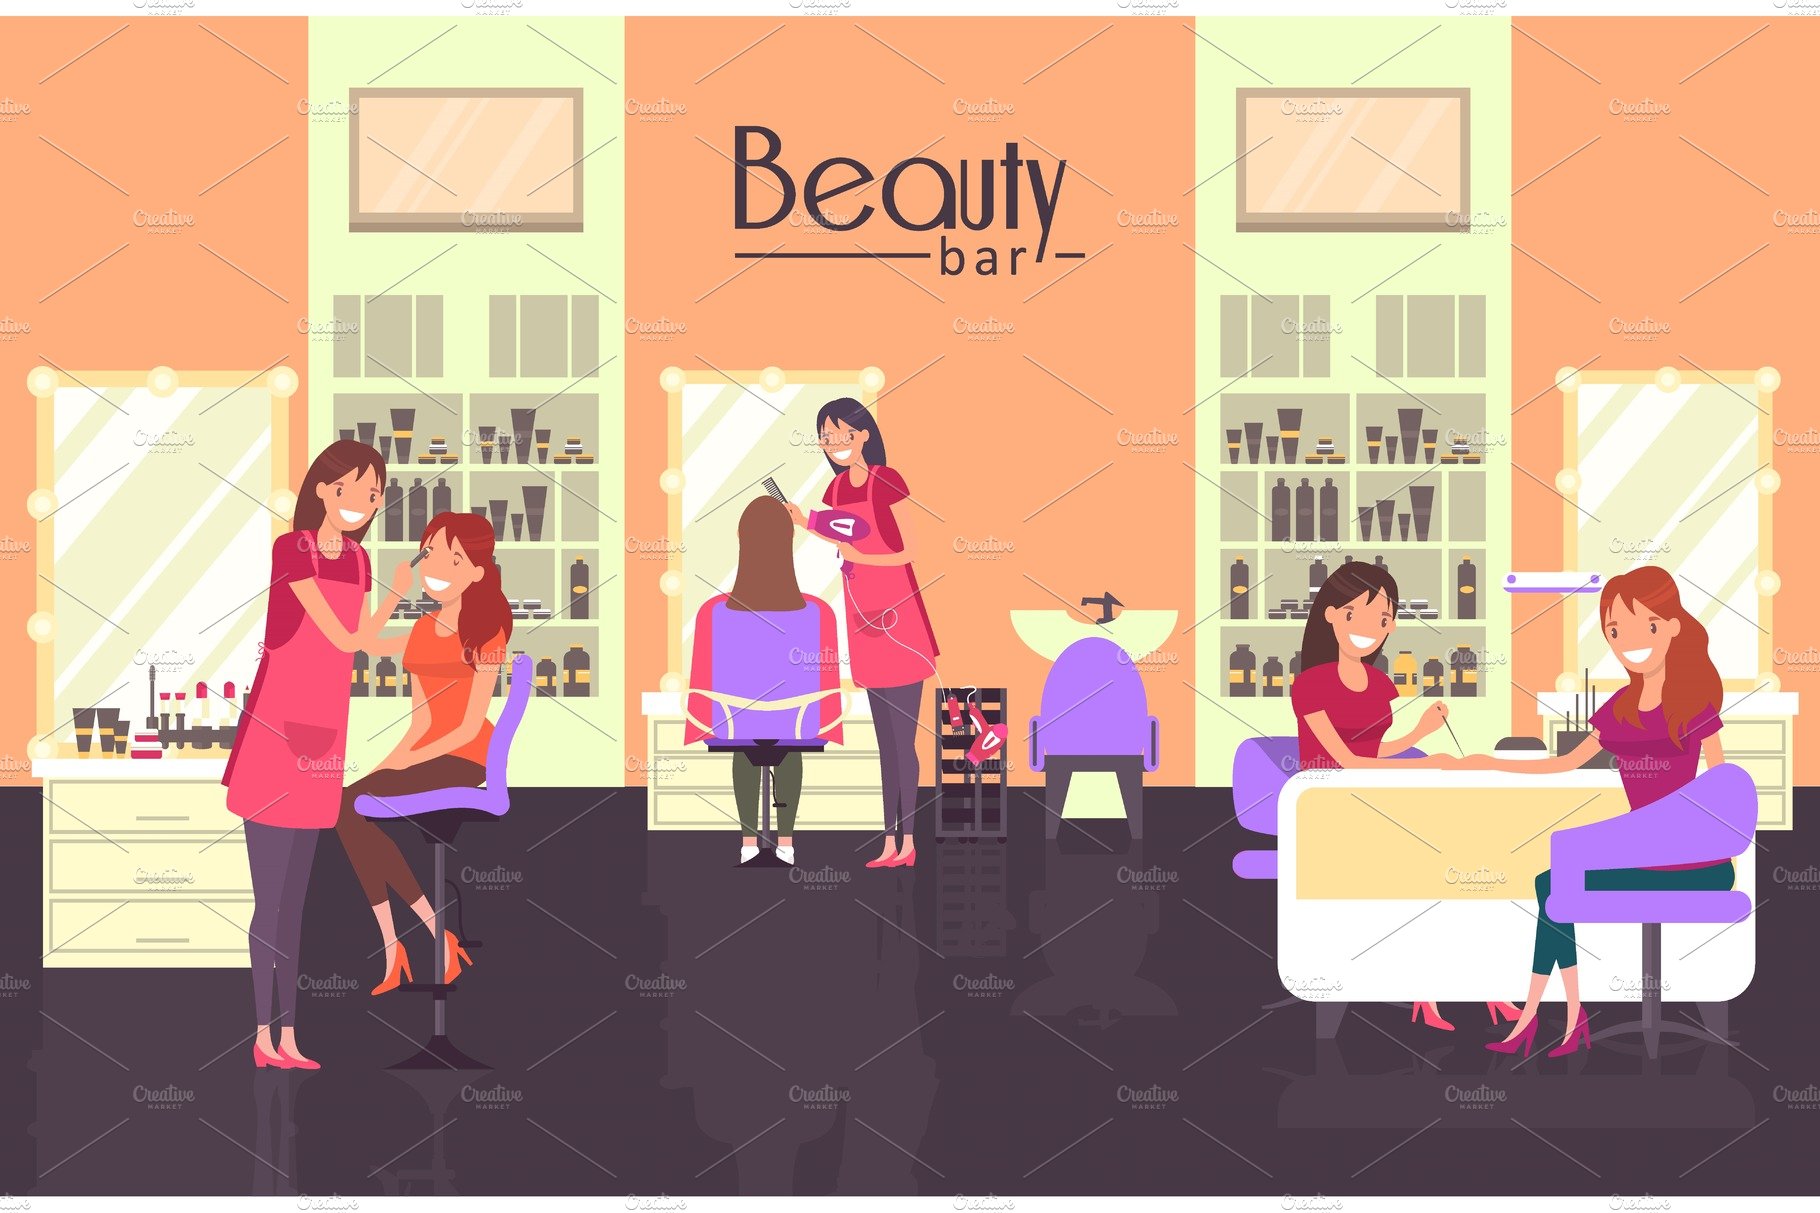 Beauty bar cover image.